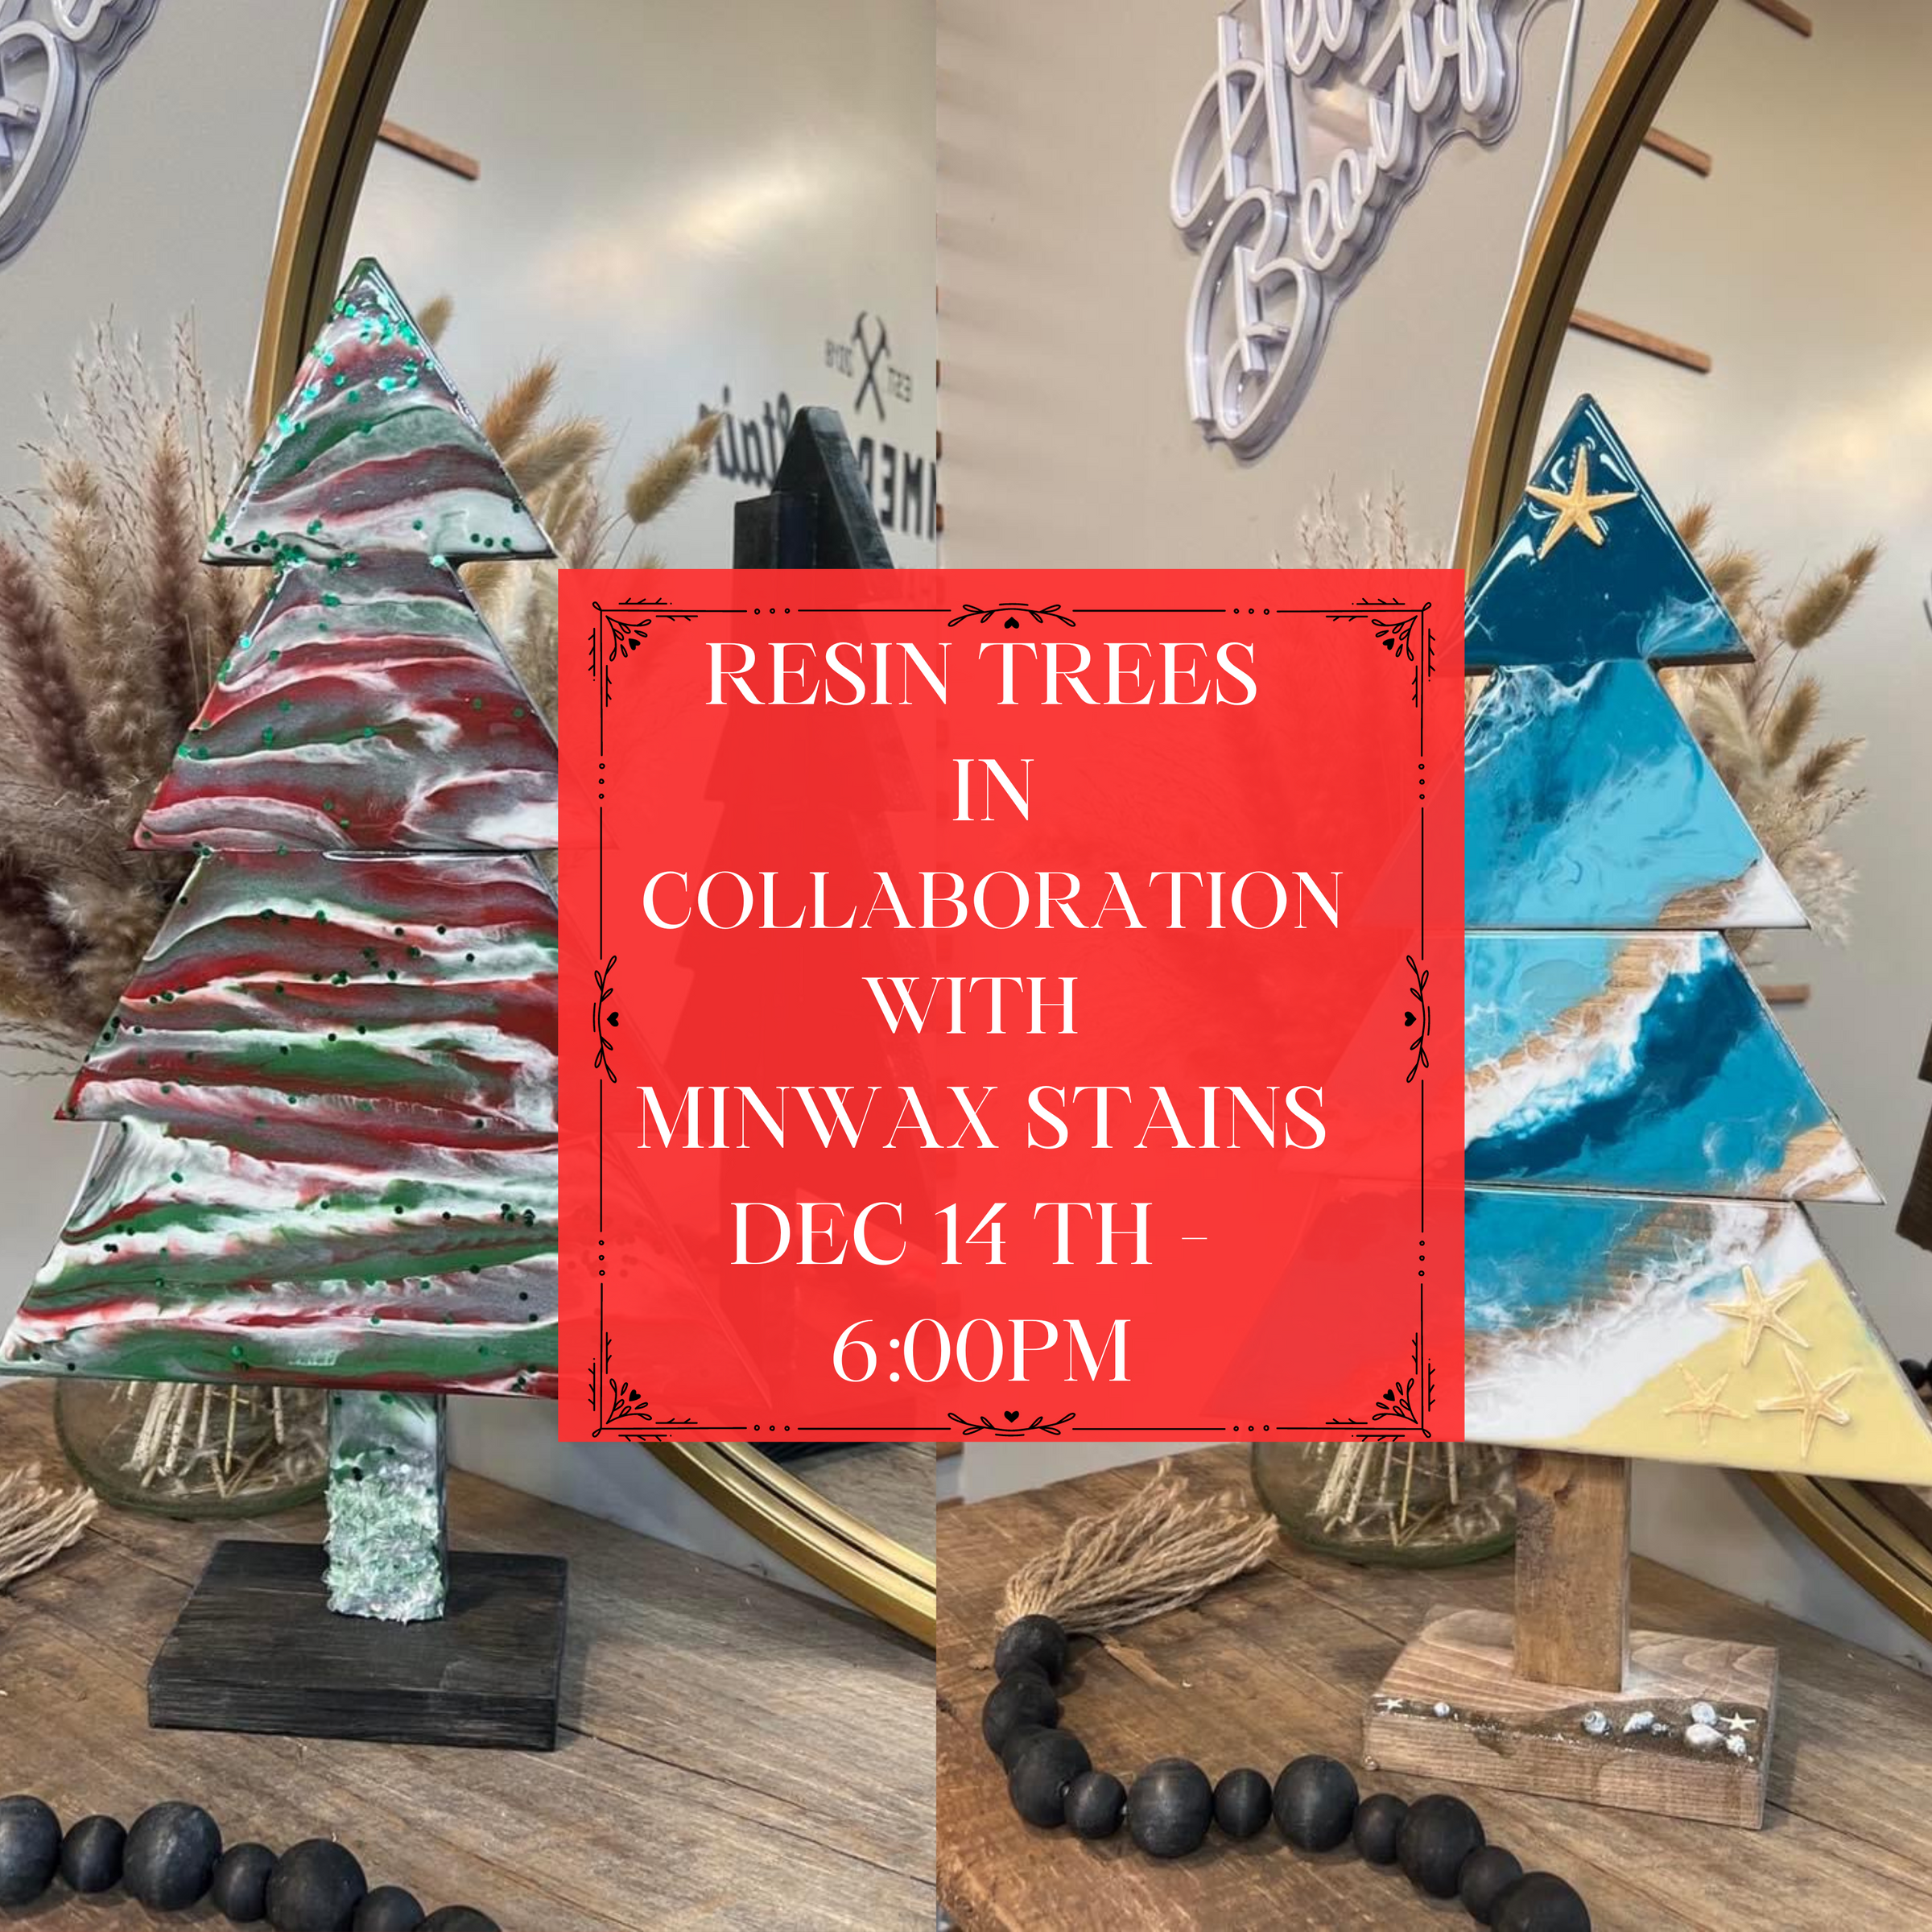 RESIN CHRISTMAS TREE IN COLLABORATION WITH MINWAX STAINS DEC 14TH - 6:00PM